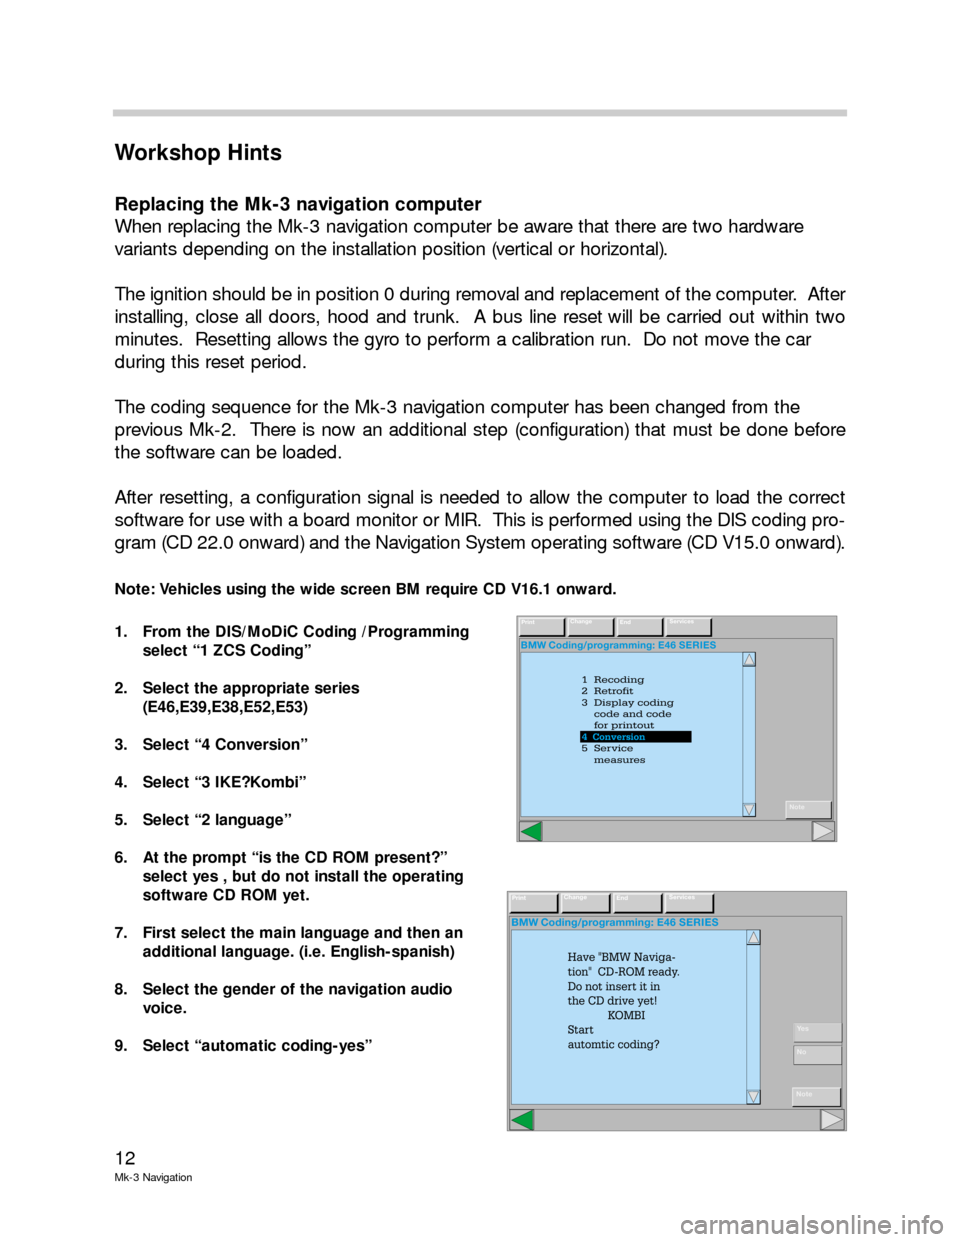 BMW 3 SERIES 2003 E46 Mk3 Navigation System Manual 12
Mk-3 Navigation
Workshop Hints
Replacing the Mk-3 navigation computer
When replacing the Mk-3 navigation computer be aware that there are two hardware 
variants depending on the installation positi